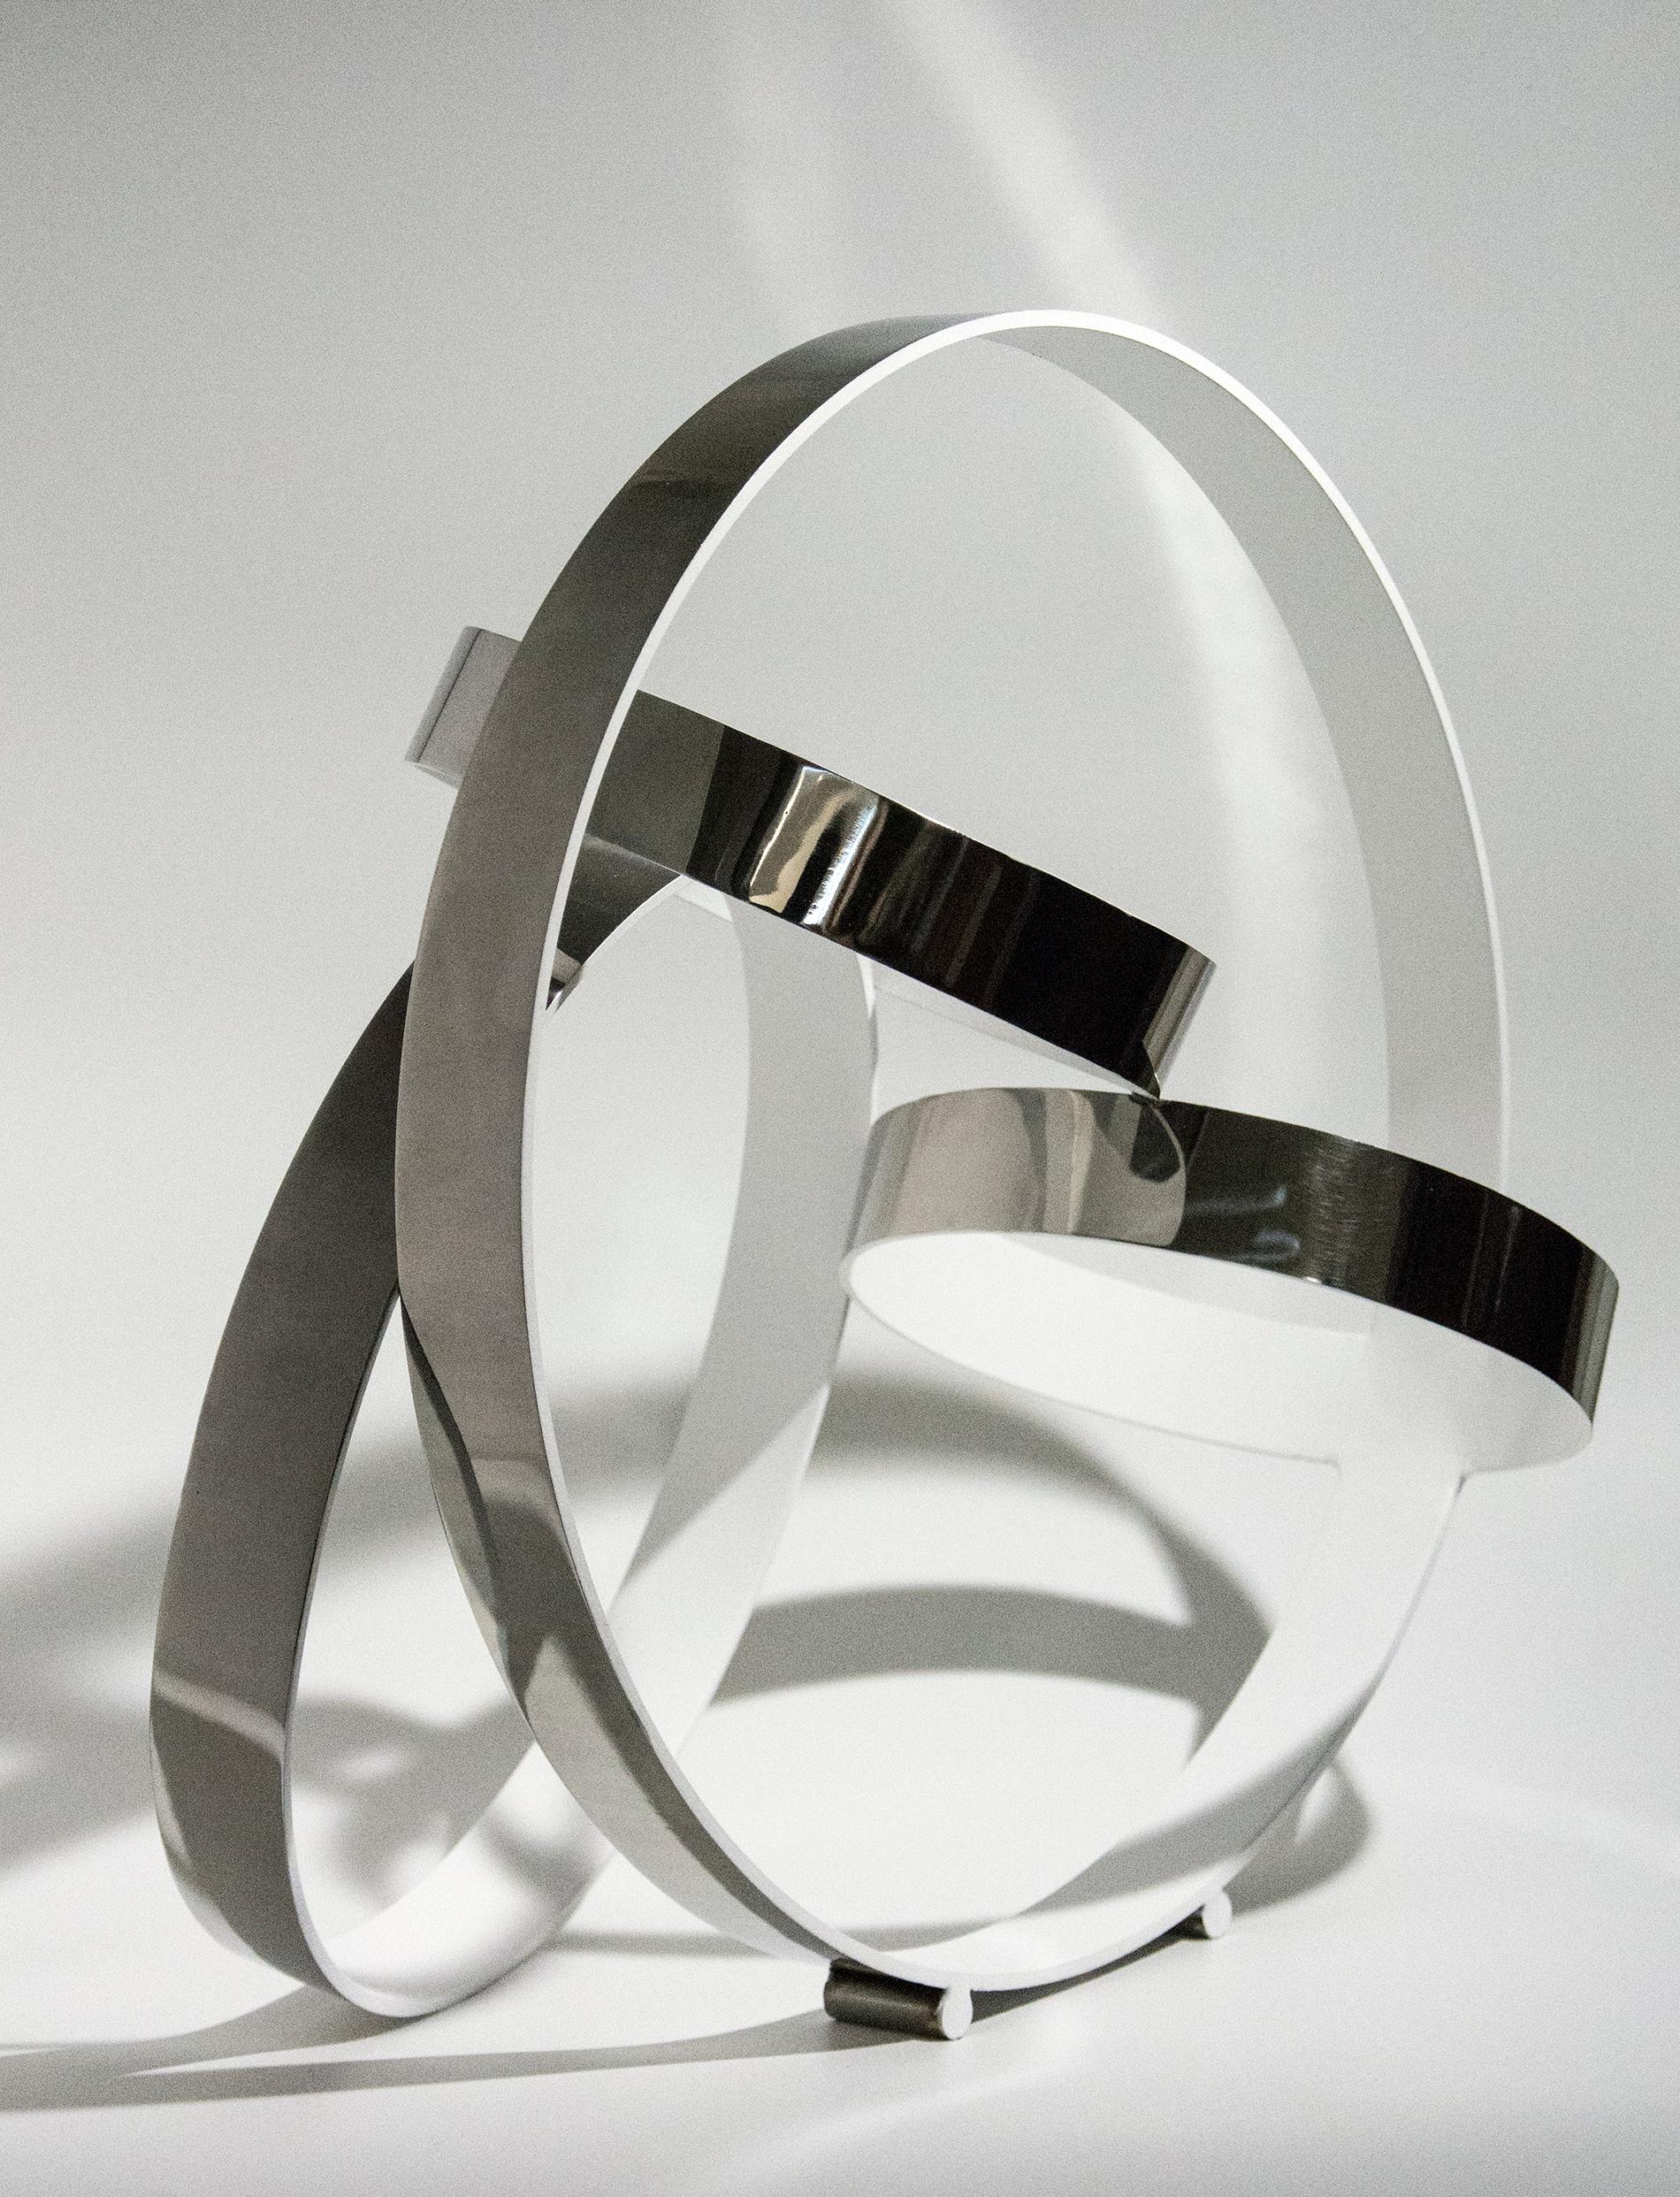 Rings of stainless steel, polished to a high sheen on the exterior and matte white on the interior, intersect at dynamic angles in this elegant sculpture by Philippe Pallafray. This piece is available by commission, please allow 4-5 weeks for